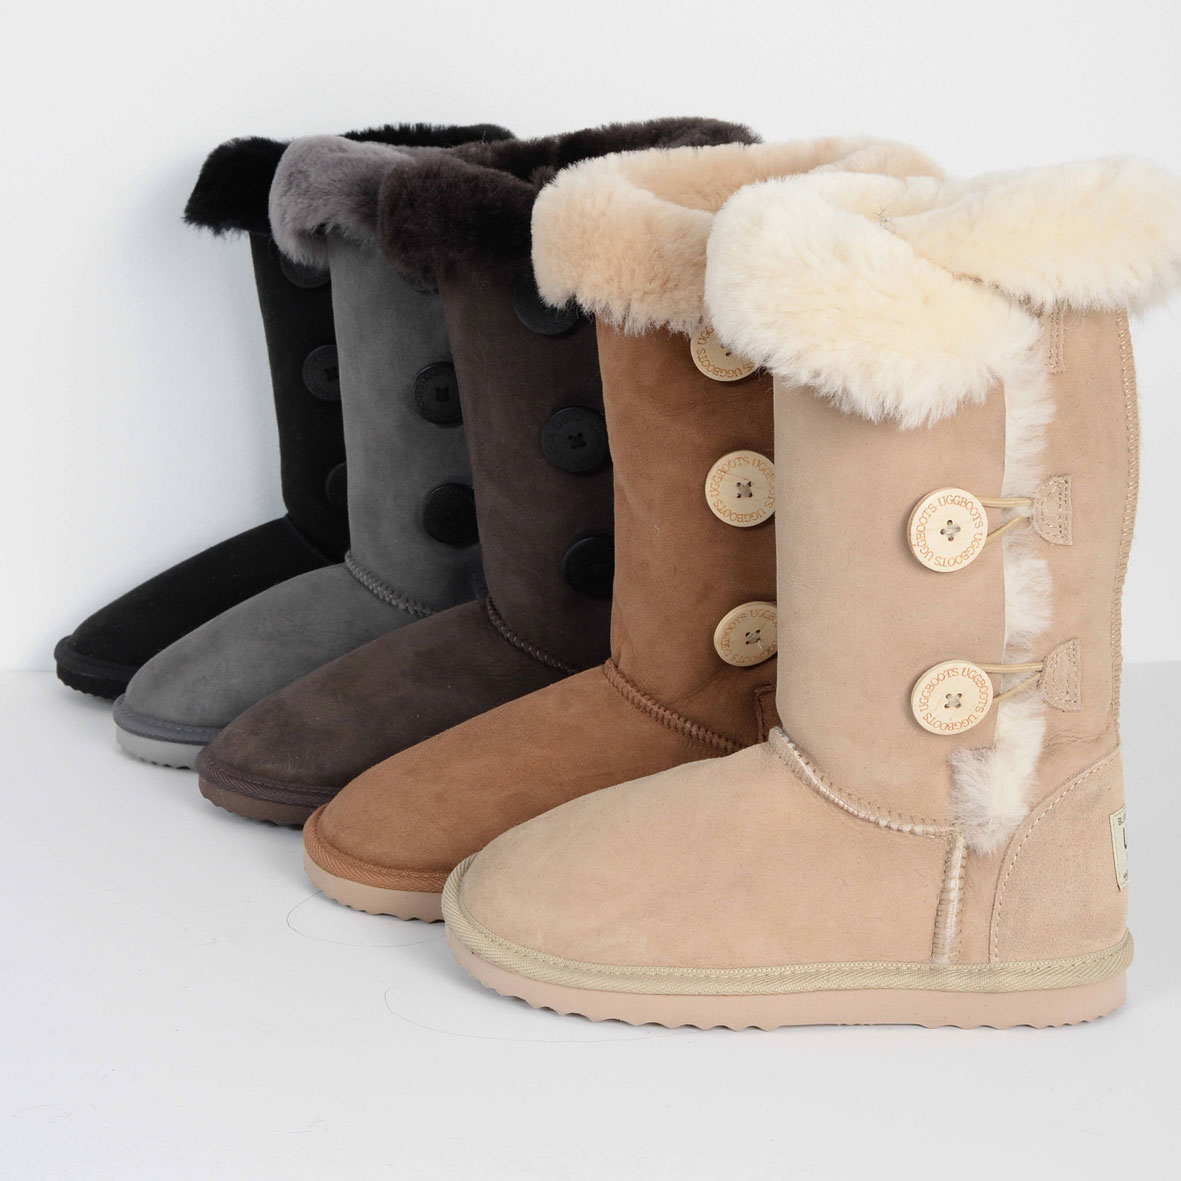 Blue Mountains Ugg Boots (Penrith 